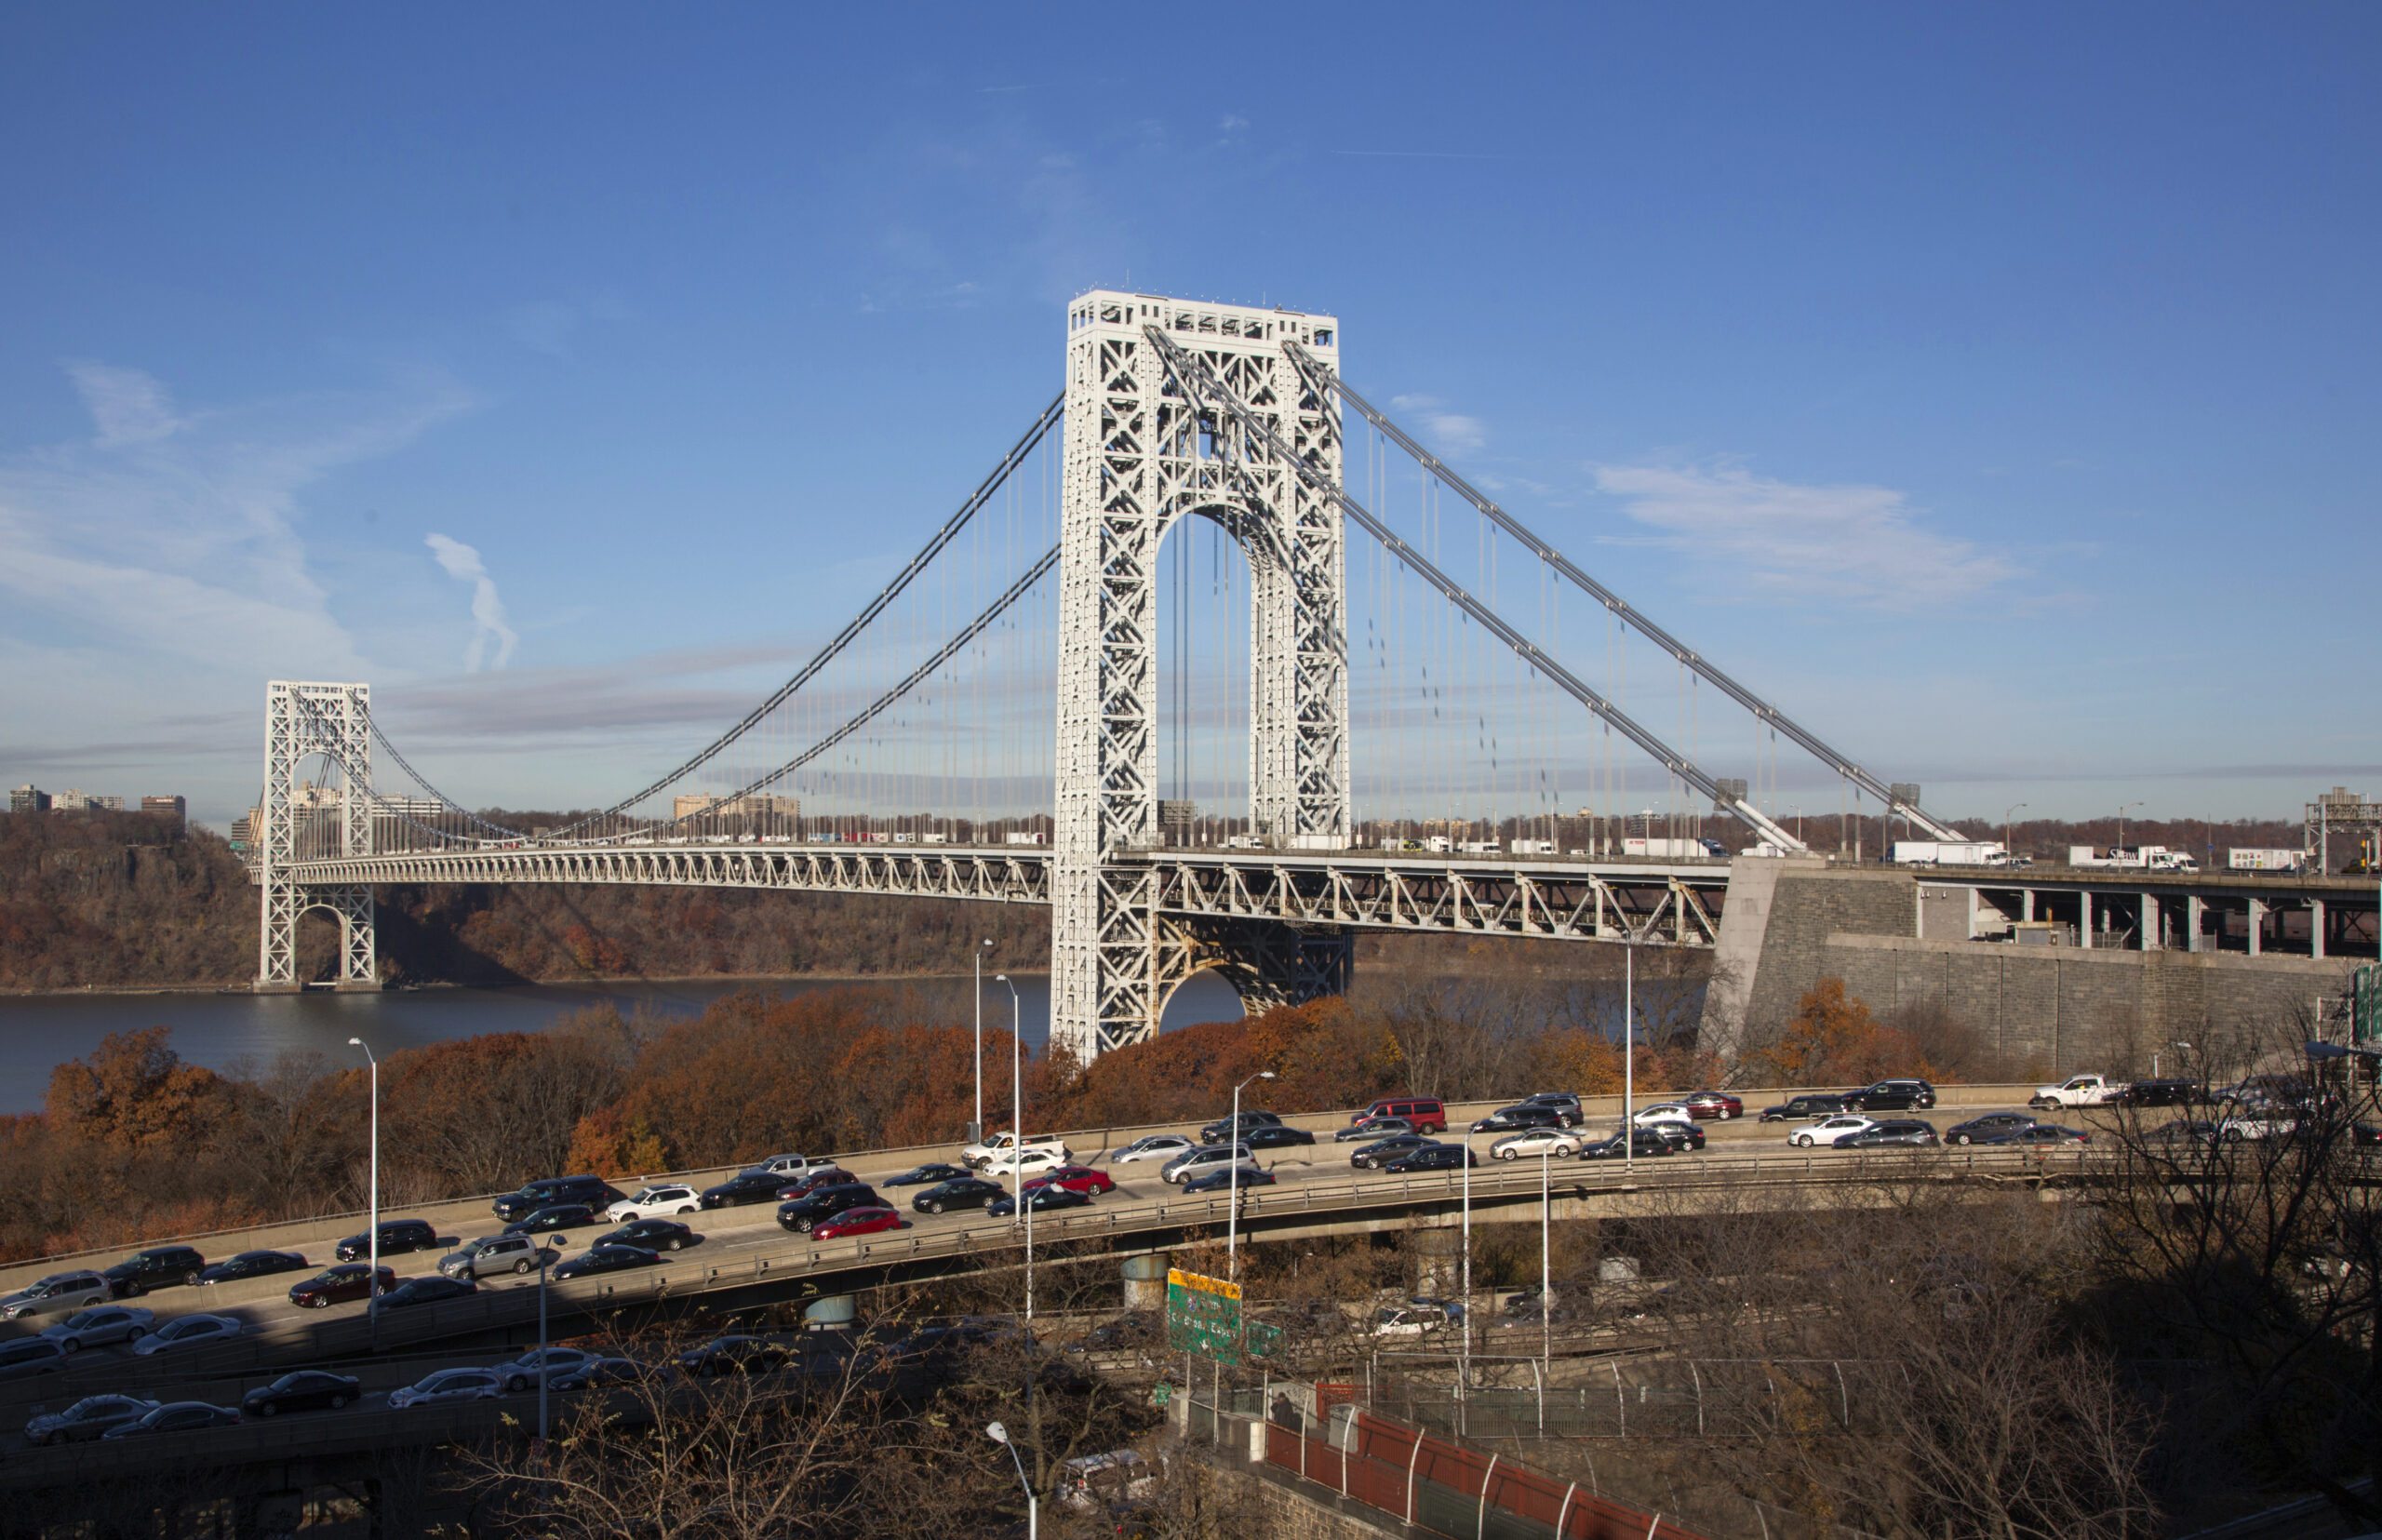 A Manhattan side view of the George Washington Bridge looking at Ft. Lee New Jersey and heavy traffic